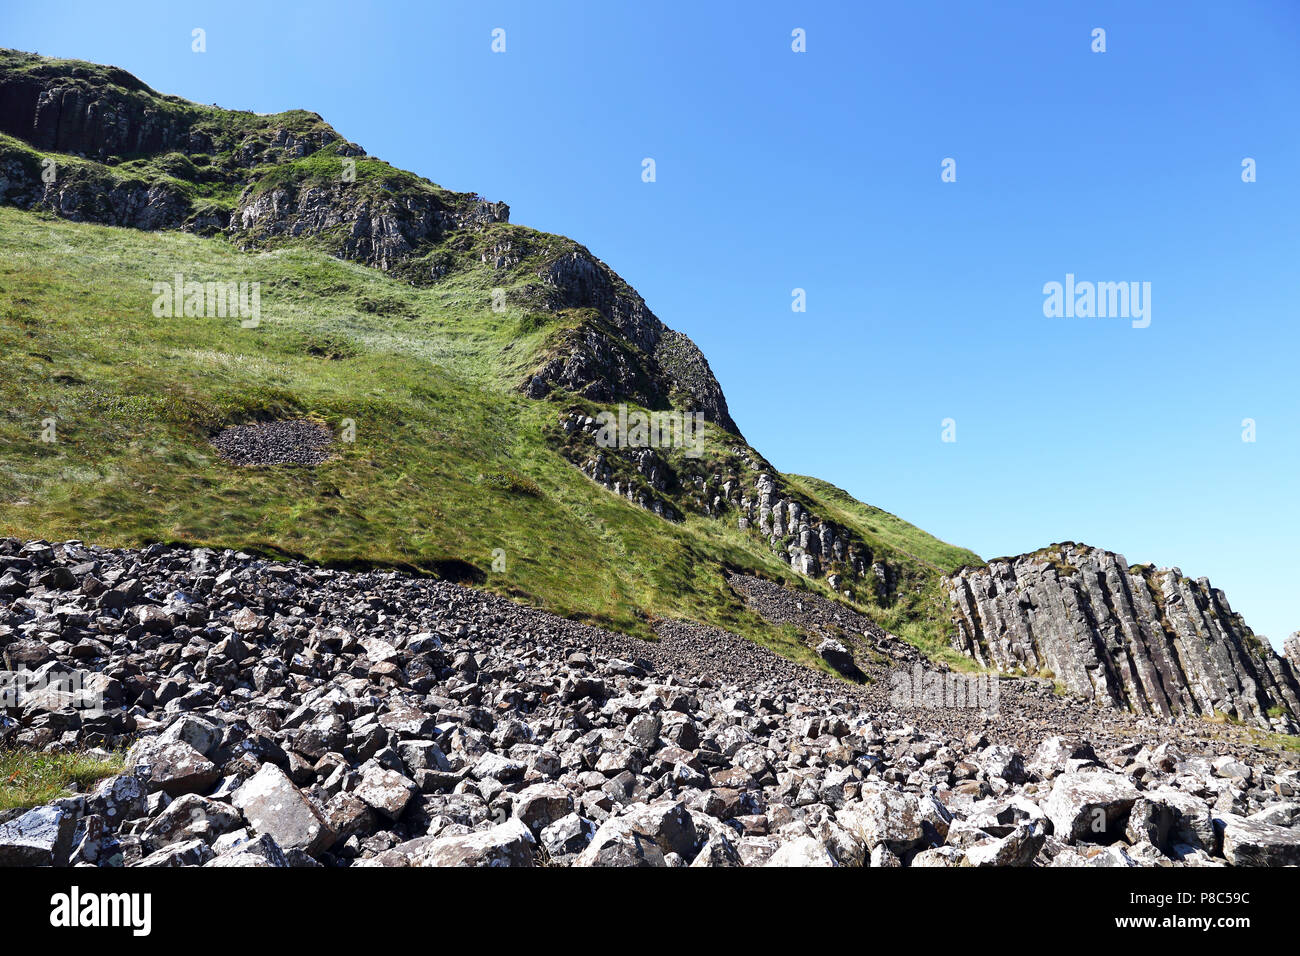 The Giant's Causeway is an area of about 40,000 interlocking basalt columns, the result of an ancient volcanic fissure eruption. It is located in Coun Stock Photo